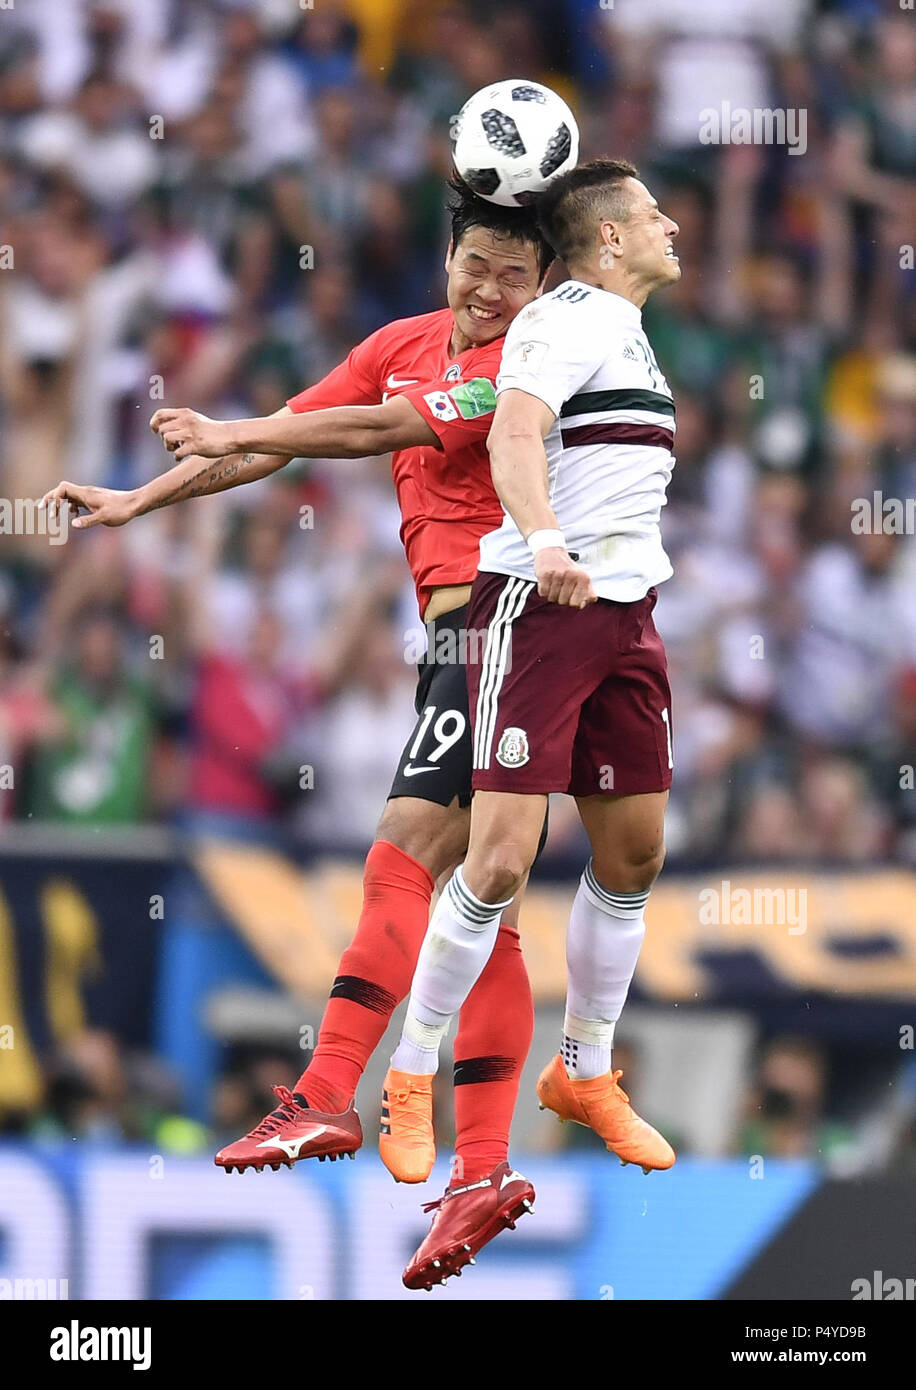 Rostov On Don. 23rd June, 2018. Kim Younggwon (L) of South Korea vies with Javier Hernandez of Mexico during the 2018 FIFA World Cup Group F match between South Korea and Mexico in Rostov-on-Don, Russia, June 23, 2018. Mexico won 2-1. Credit: Chen Yichen/Xinhua/Alamy Live News Stock Photo